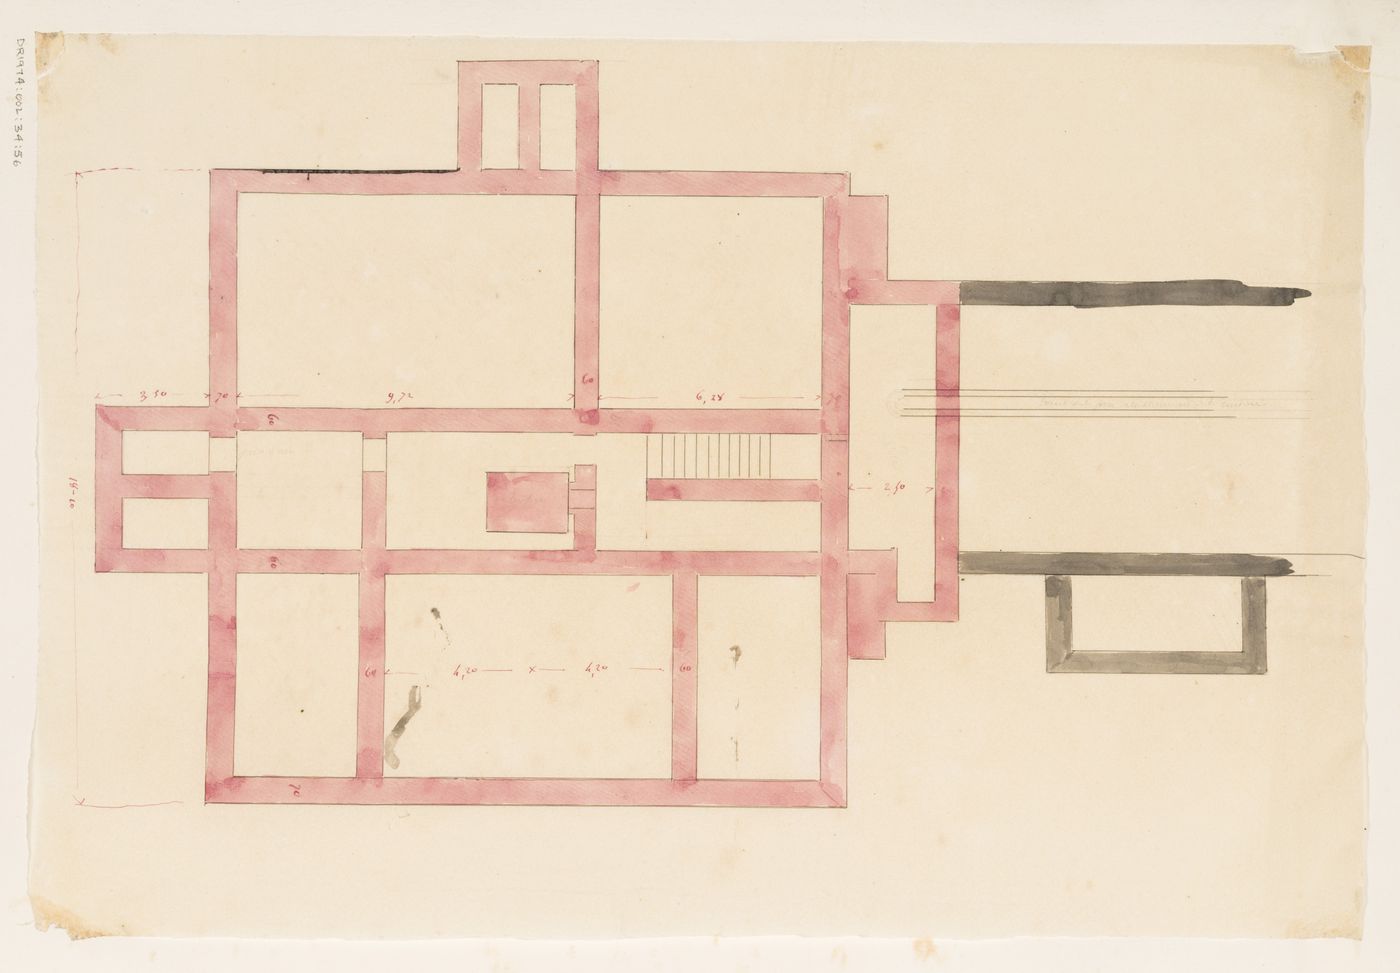 Project no. 8 for a country house for comte Treilhard: Foundation plan